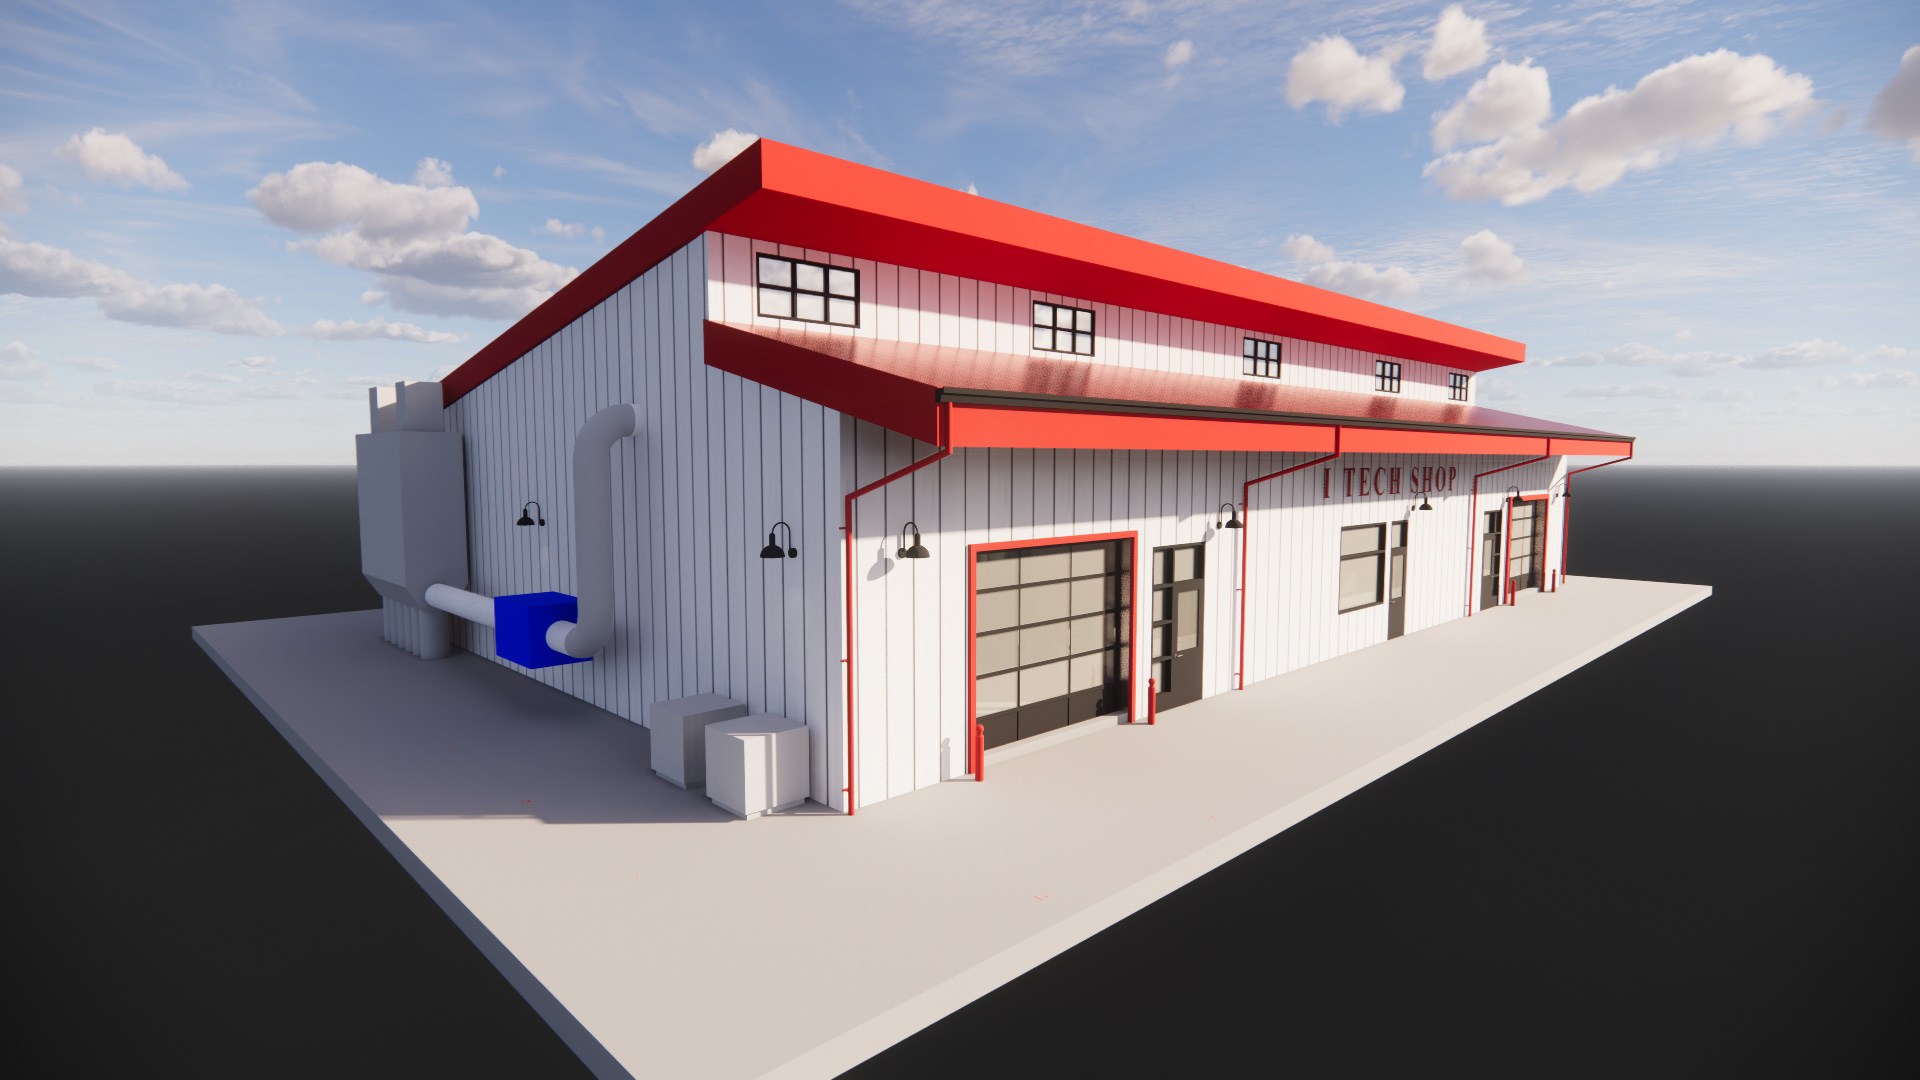 Conceptual rendering of shop building, white walls and bright red roof.